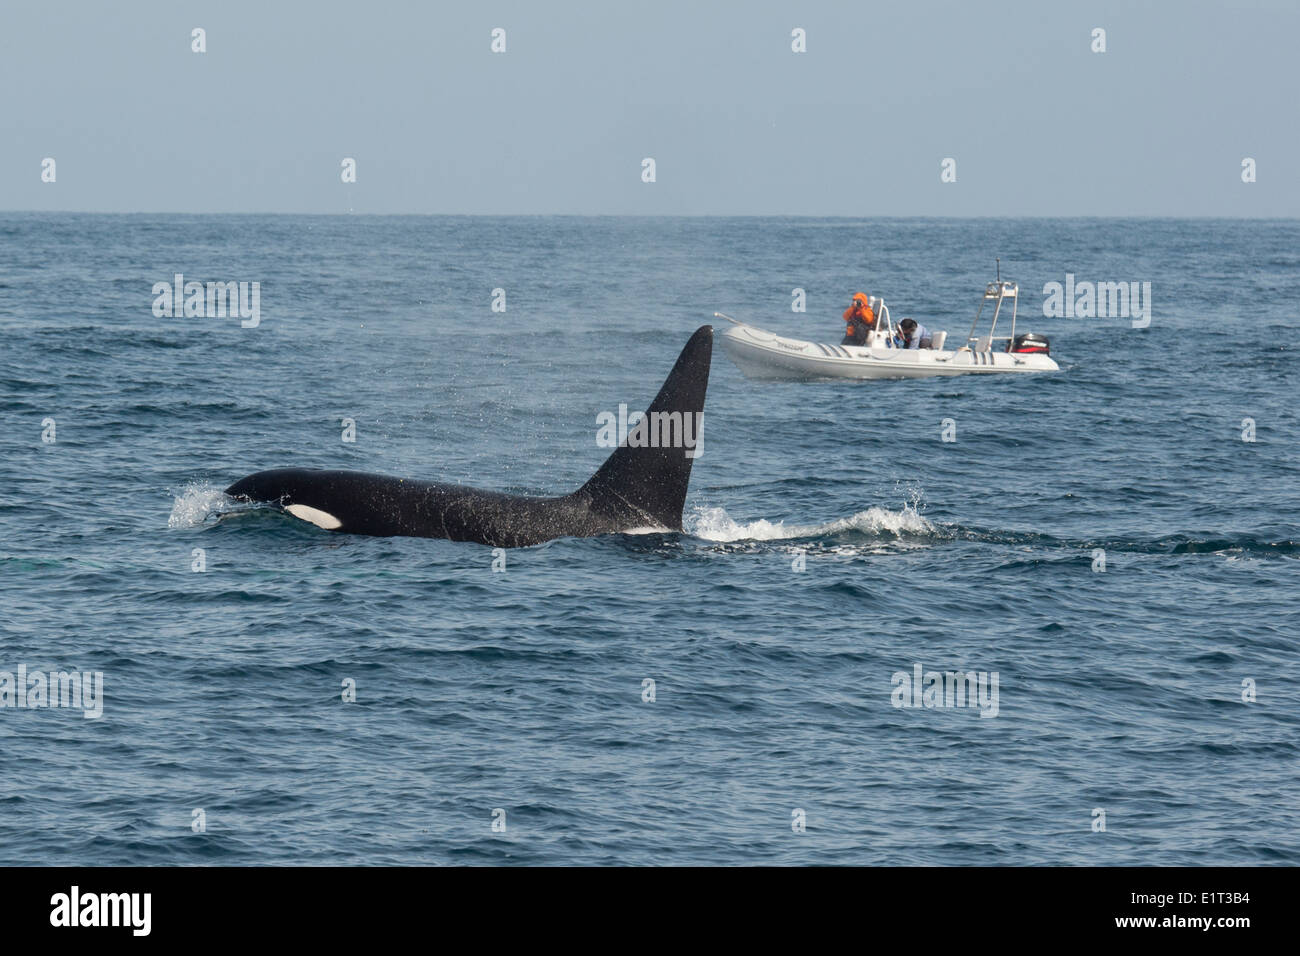 Male Transient/Biggs Killer Whale/Orca (Orcinus orca). Surfacing in front of whale watching boat, Monterey, Pacific Ocean. Stock Photo